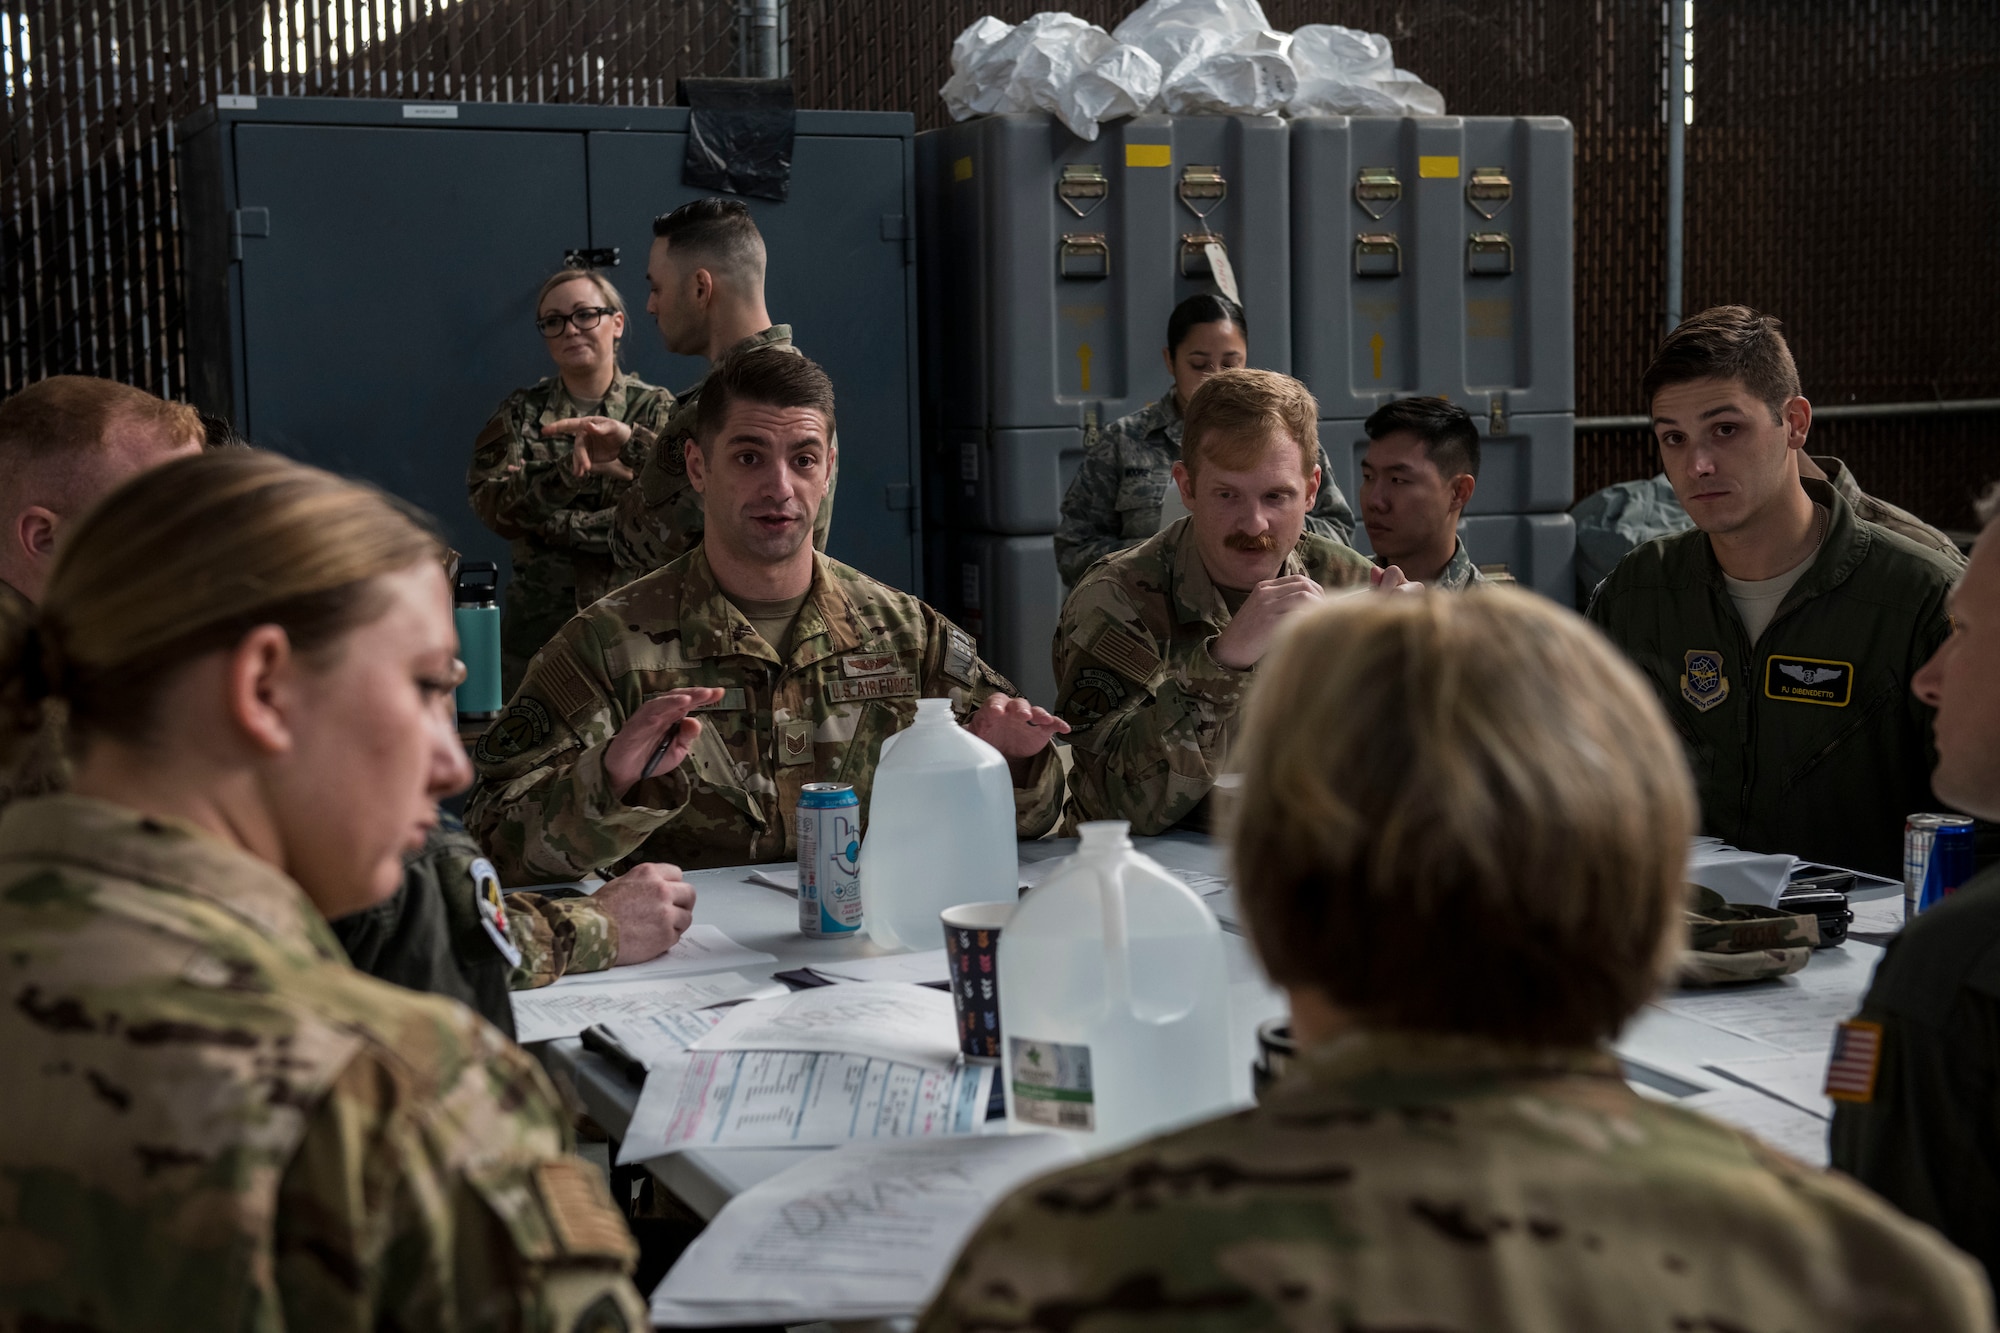 Tech. Sgt. Todd Olsson, an aeromedical technician assigned to the 43rd Aeromedical Evacuation Squadron from Pope Army Air Field, N.C., gives a mission brief to other members of the 43rd AES during a Transport Isolation System training exercise at Joint Base Charleston, S.C., October 23, 2019. The TIS is a device used to transport Ebola patients, either by C-17 Globemaster III or C-130 Hercules, while preventing the spread of disease to medical personnel and aircrews until the patient can get to one of three designated hospitals in the United States that can treat Ebola patients. JB Charleston is currently the only military installation with a TIS. The TIS mission is a sub-specialty of the aeromedical evacuation mission which requires frequent training to maintain readiness.